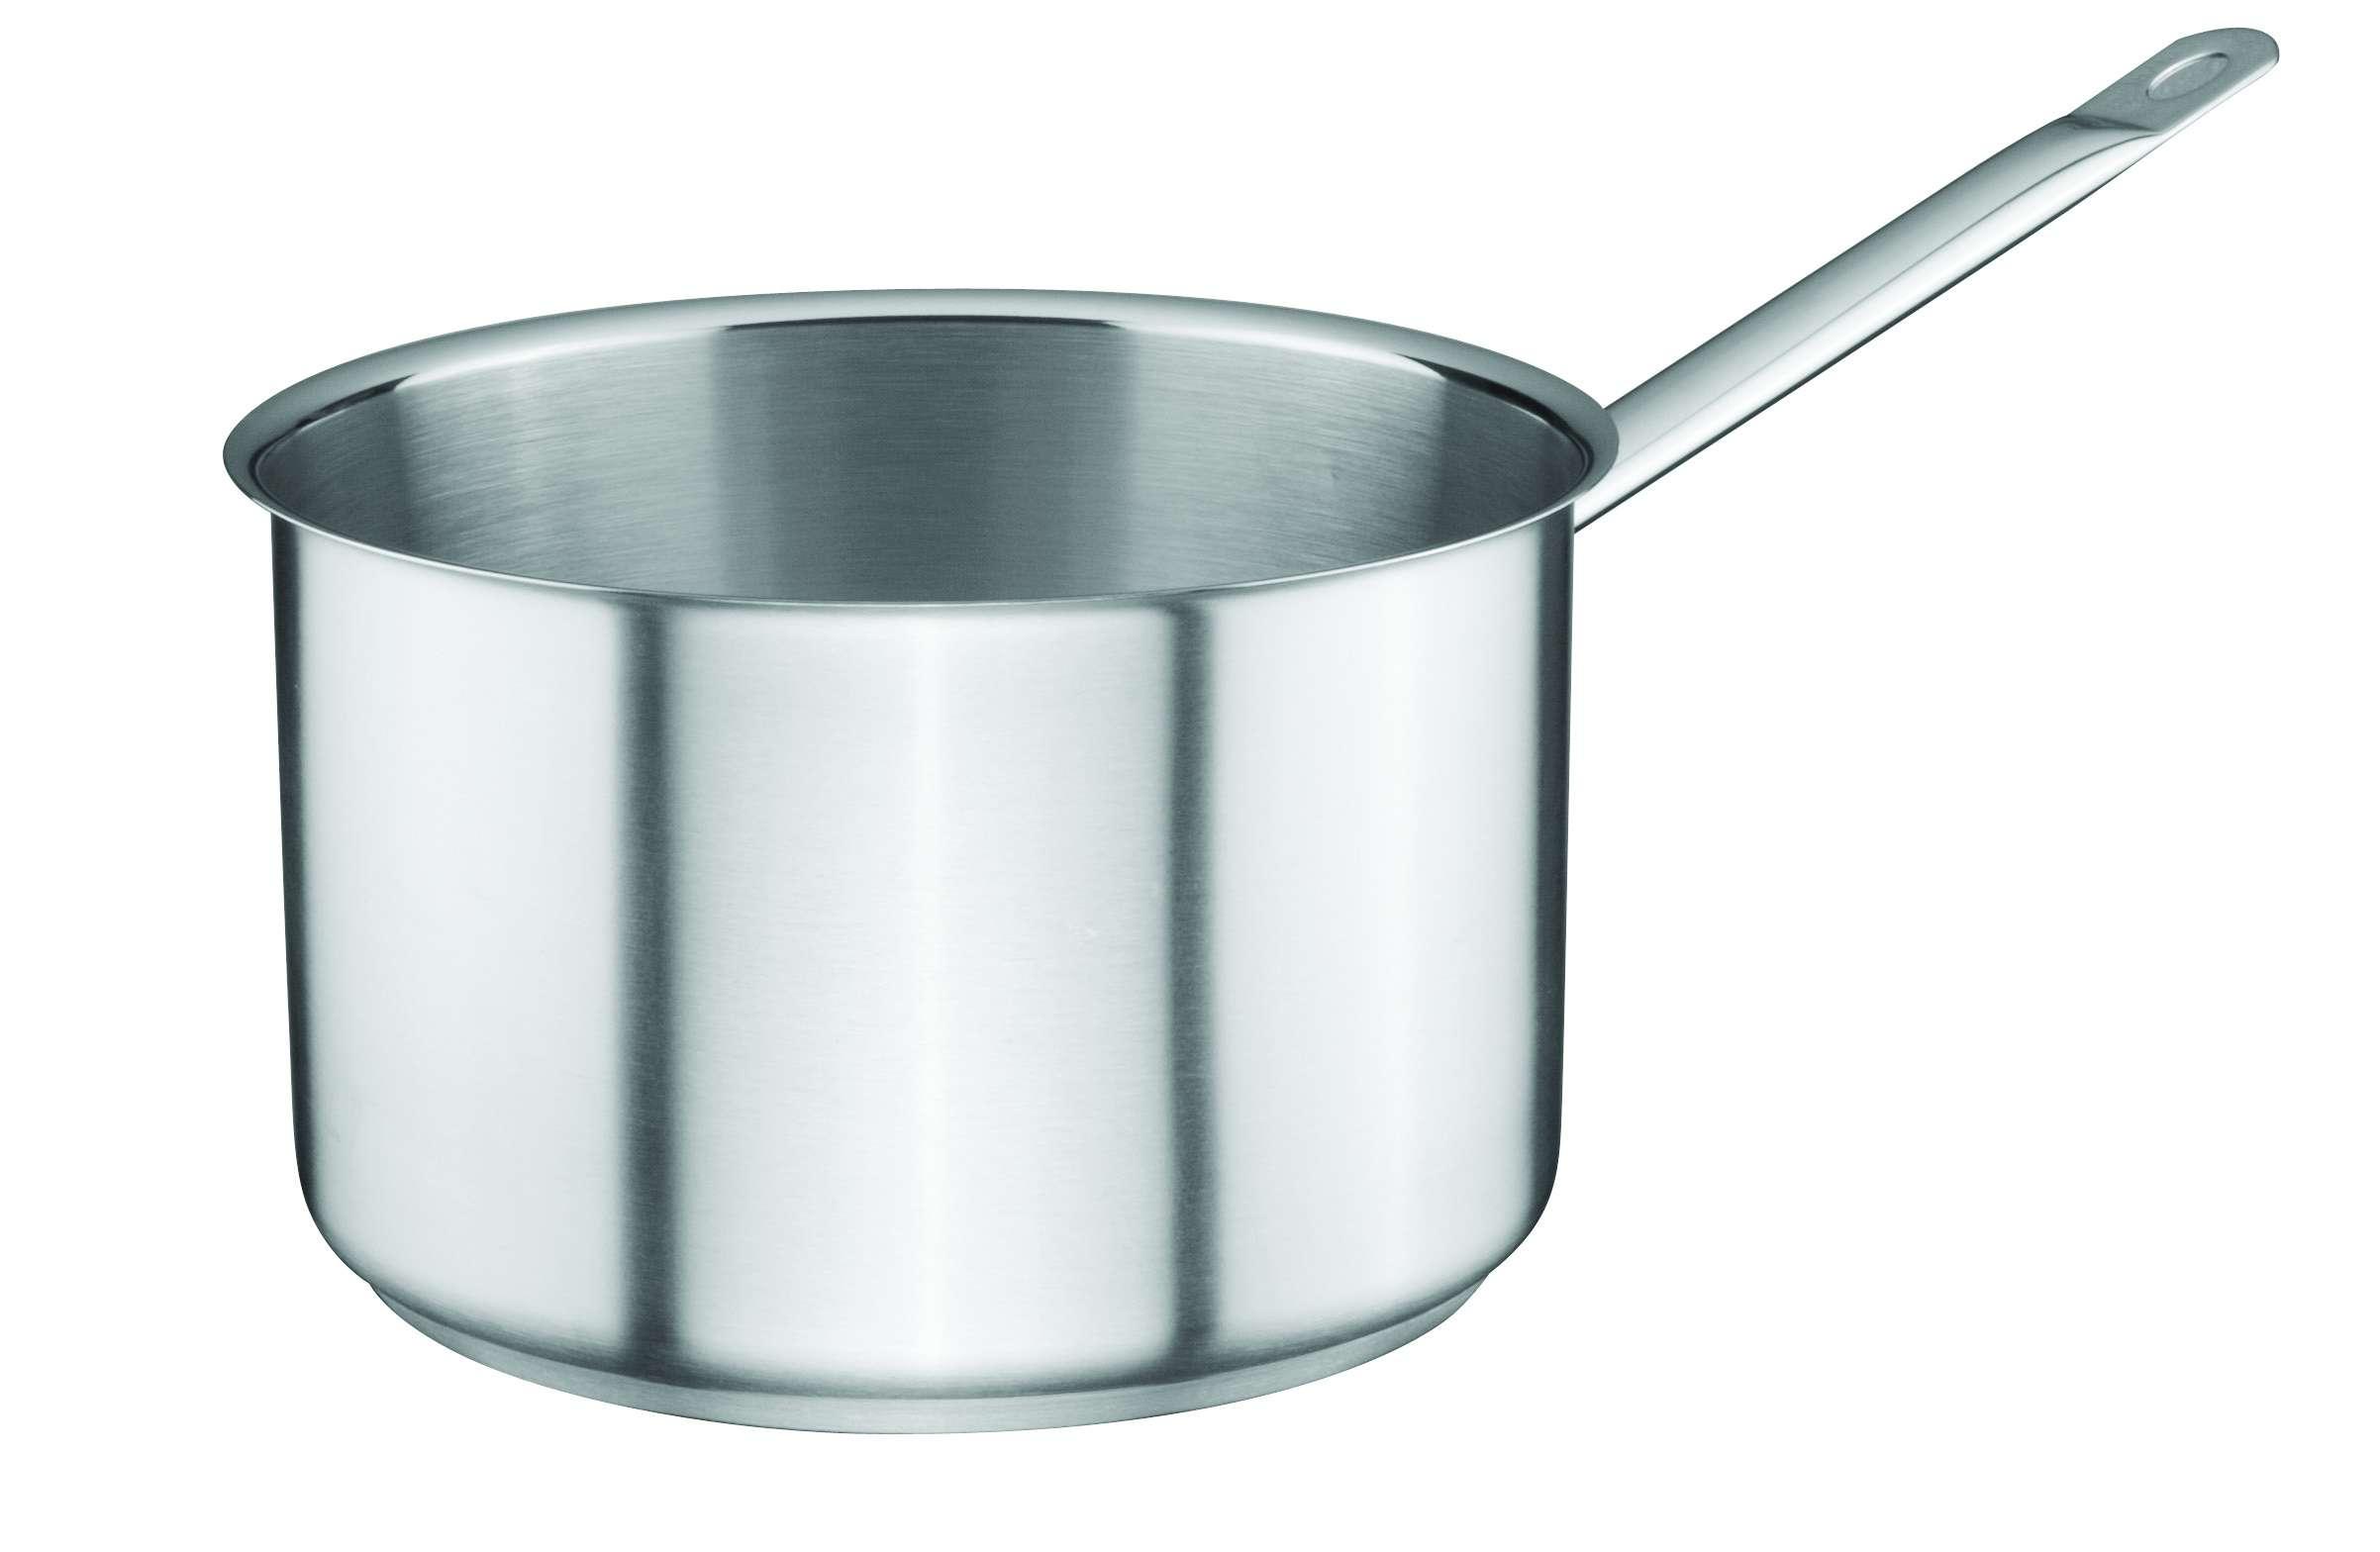 Ozti Stainless Steel Sauce Pan 18 cm x 8 cm Silver Stainless Steel